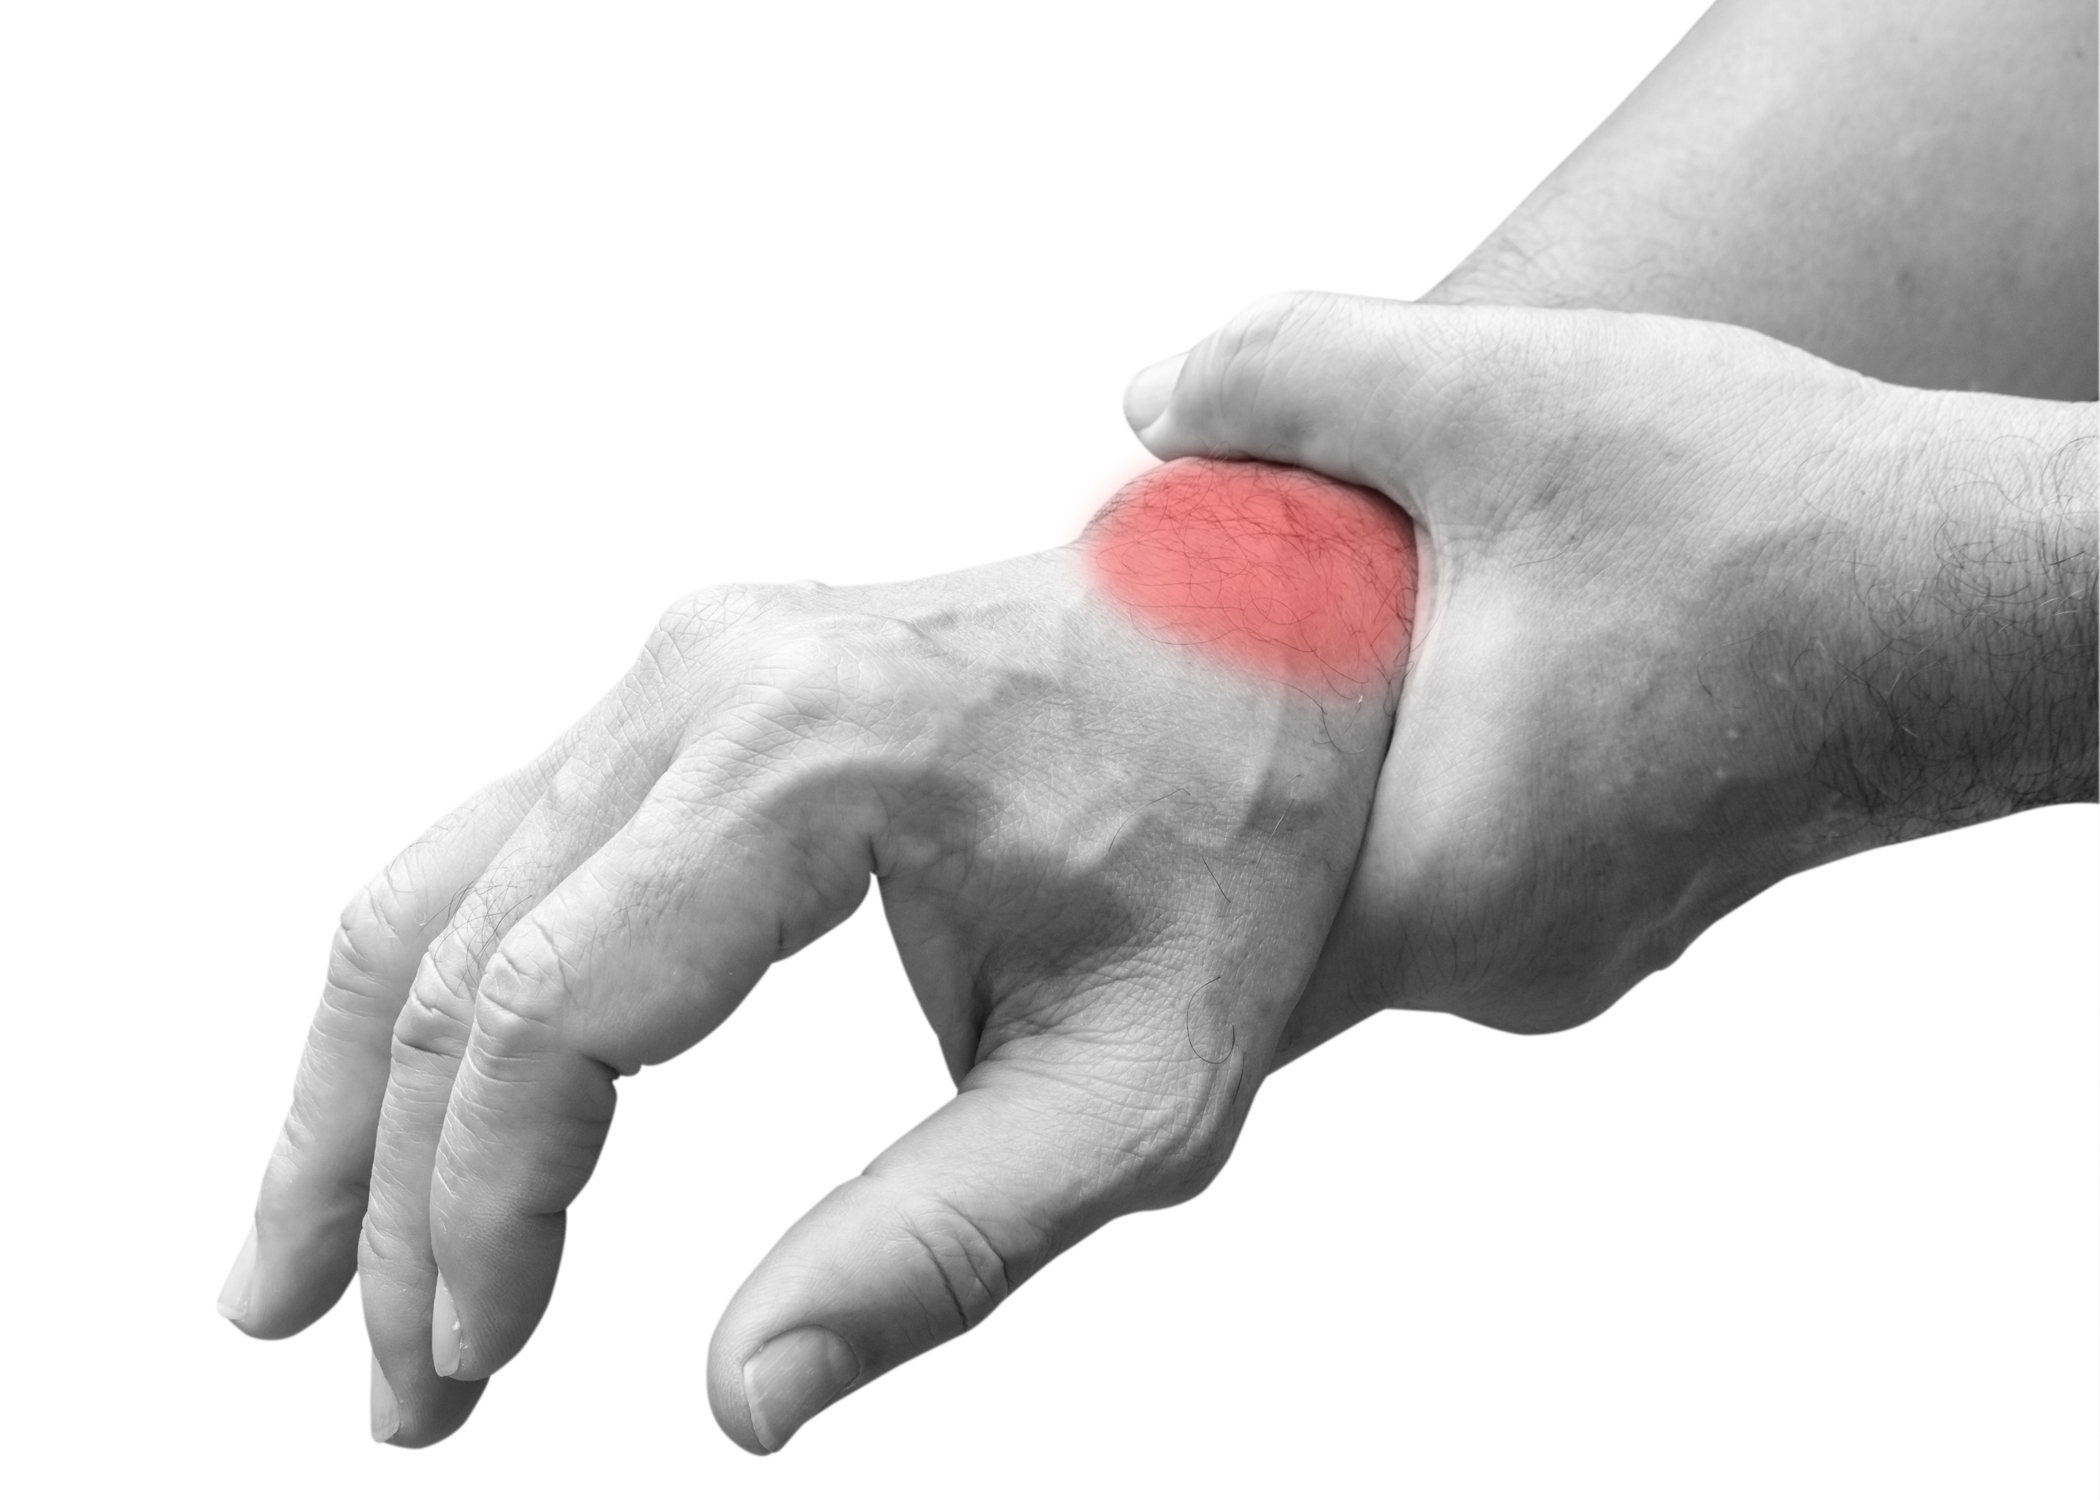 Oman health: 5 misconceptions about joint pain